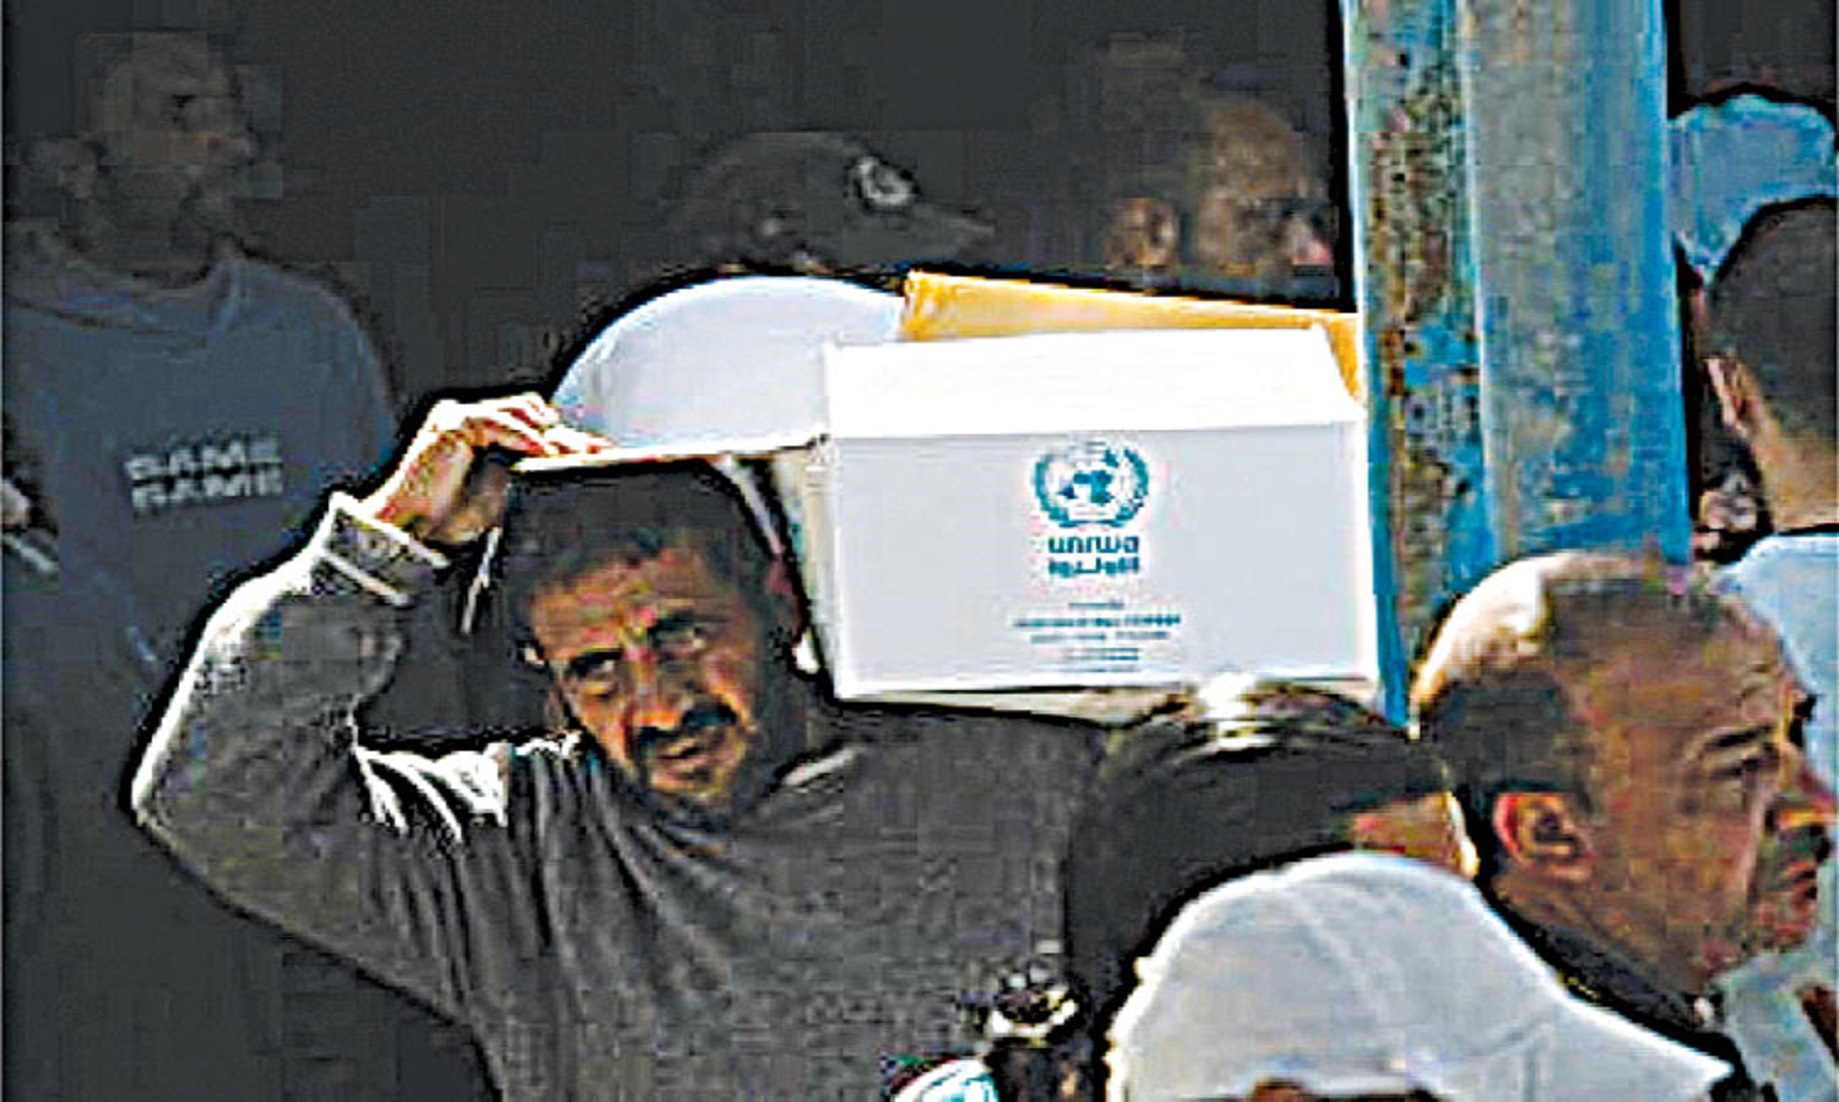 UNRWA Official Says Financial Situation Of UN Agency “Extremely Dangerous”